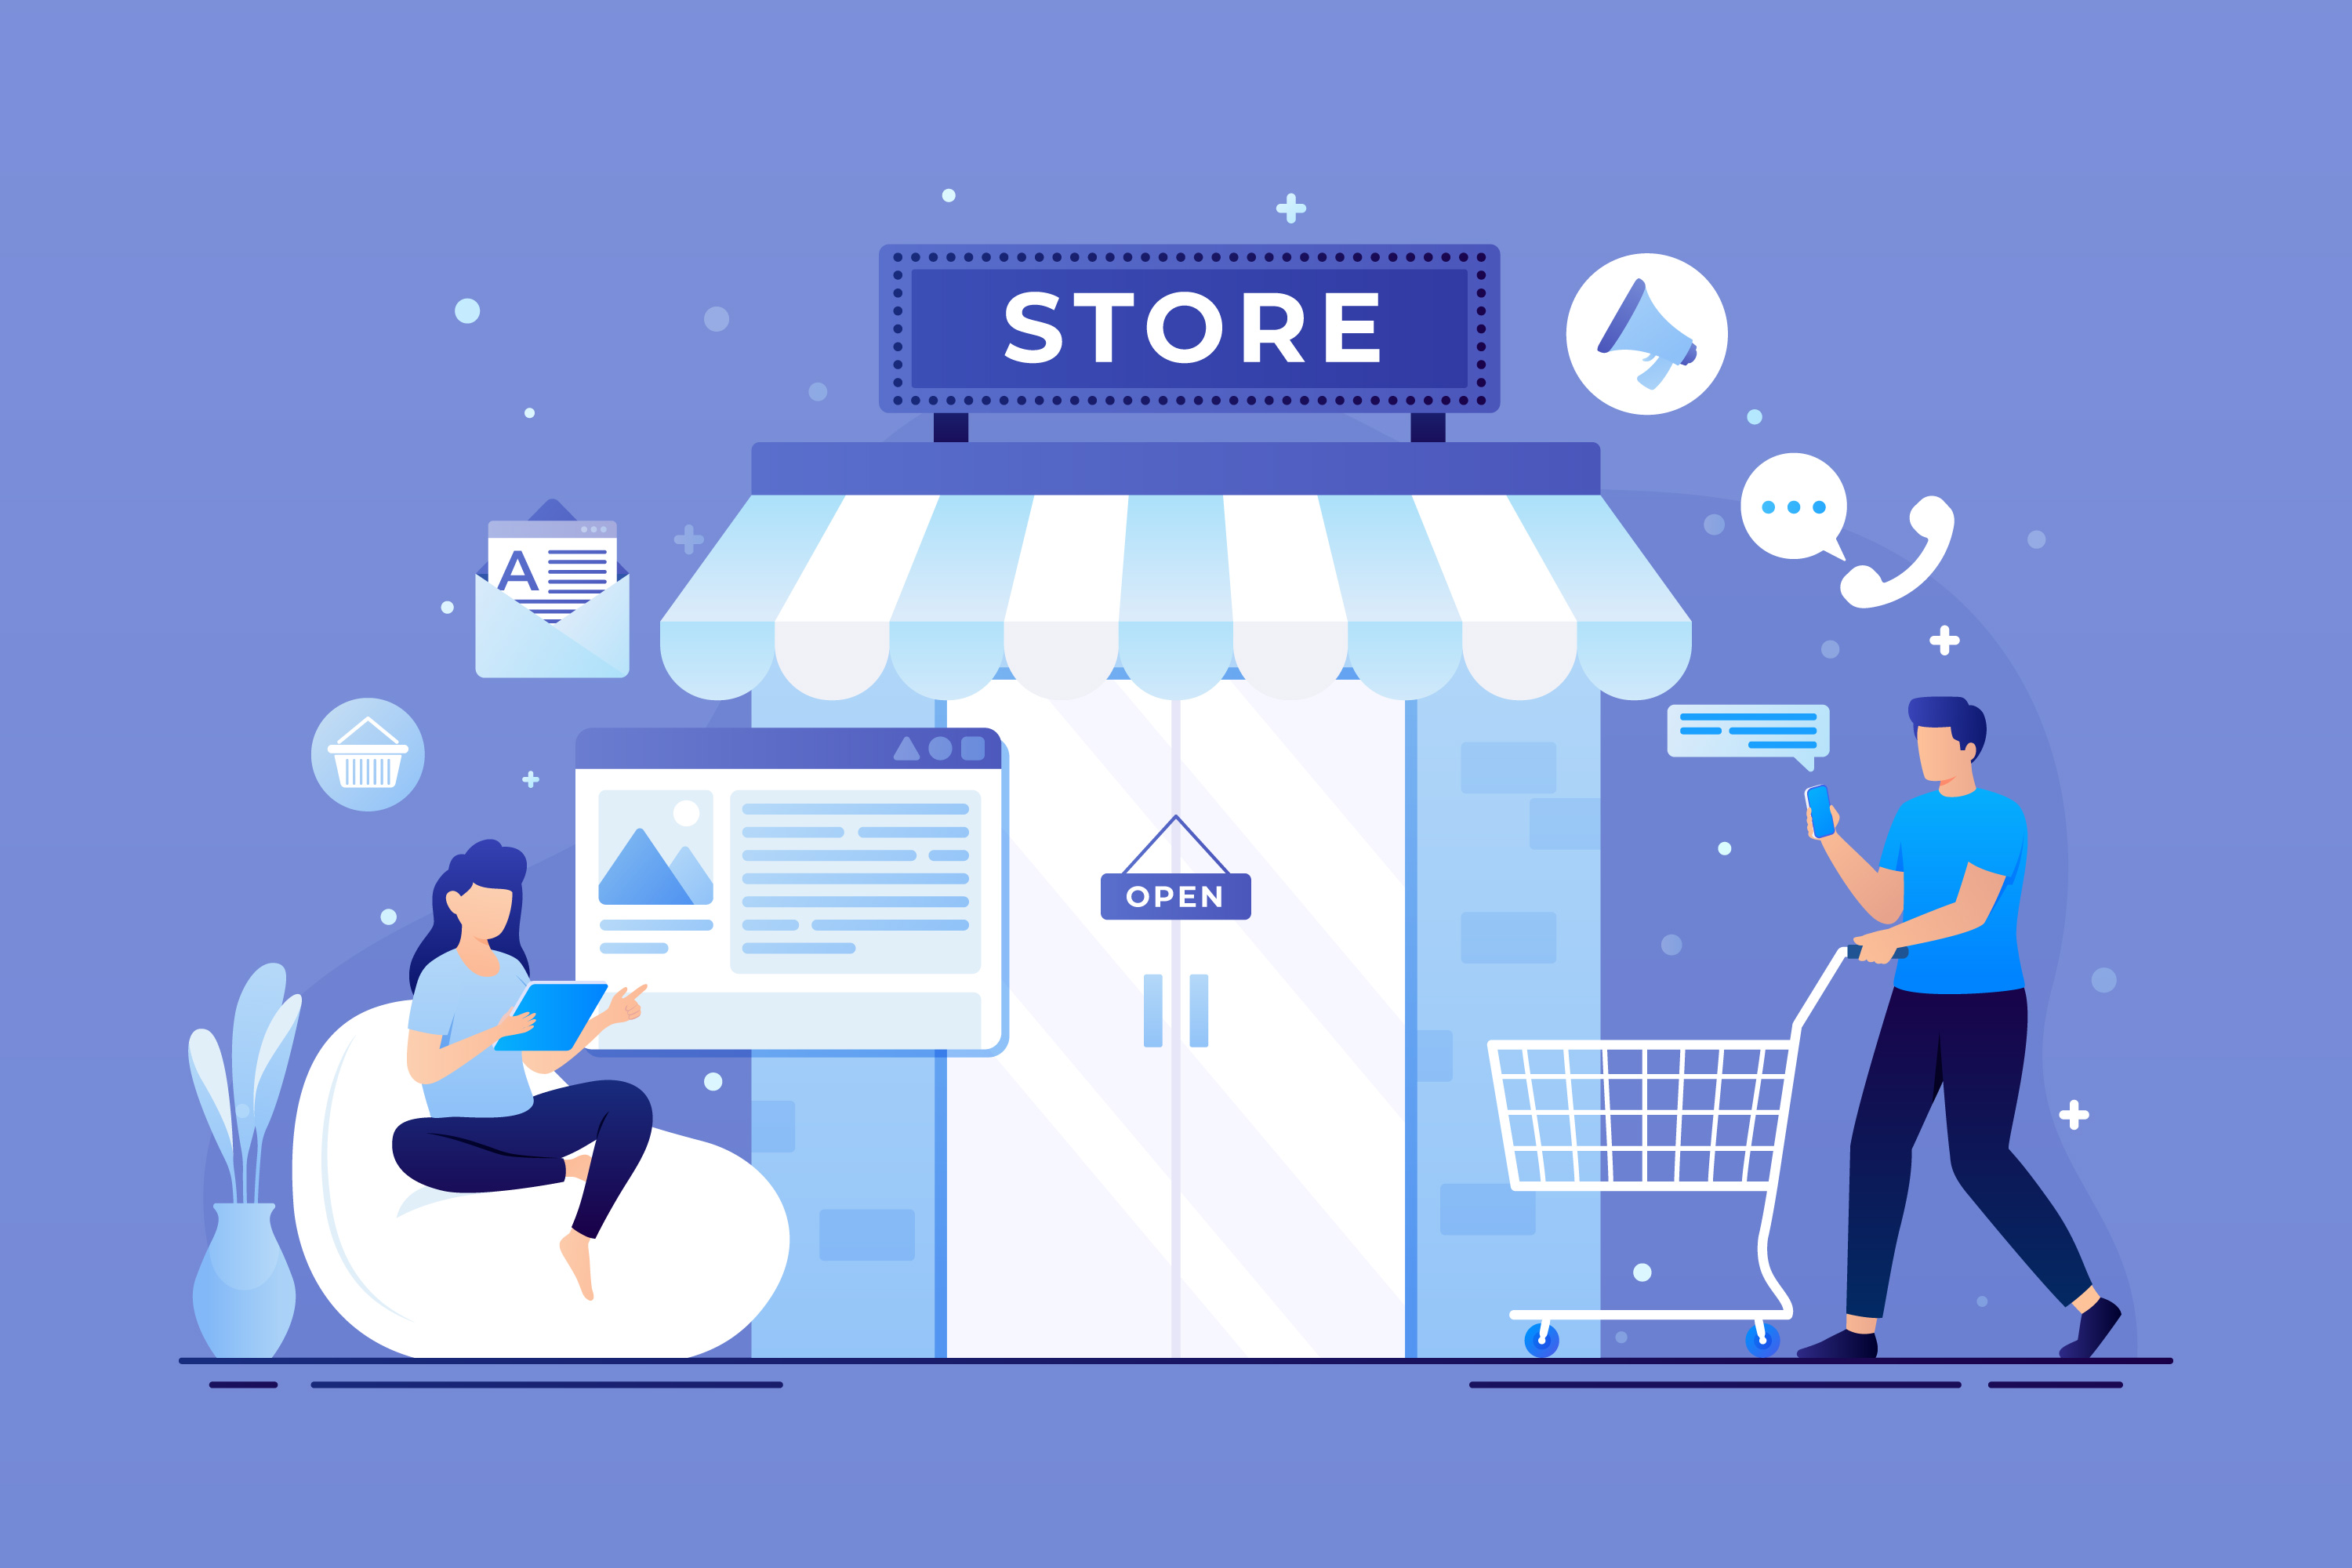 Top 6 E-commerce Business Ideas For 2021